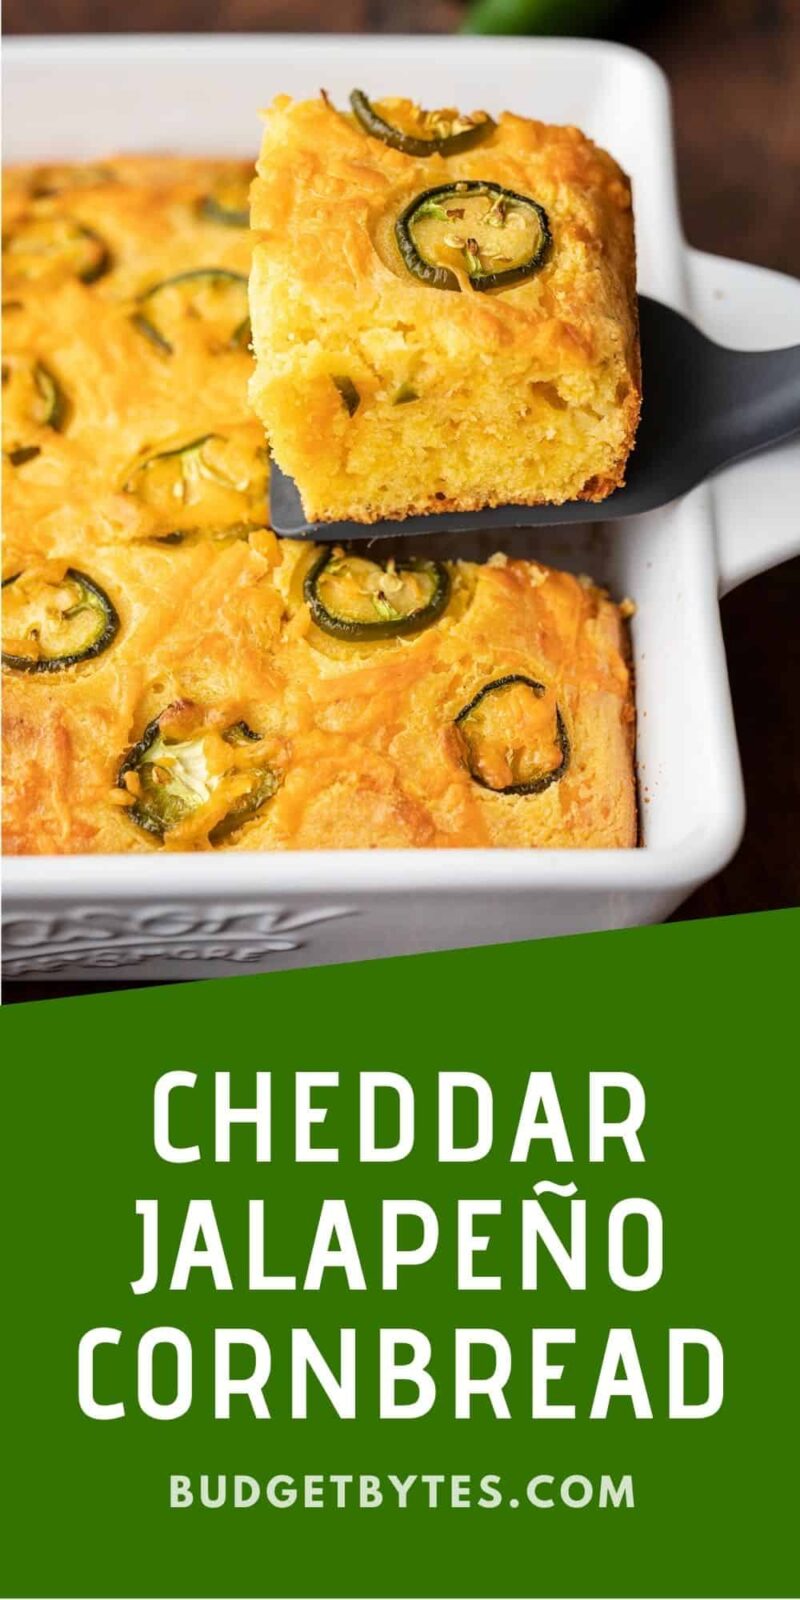 A slice of jalapeño Cheddar Cornbread being lifted out of the baking dish, title text at the bottom